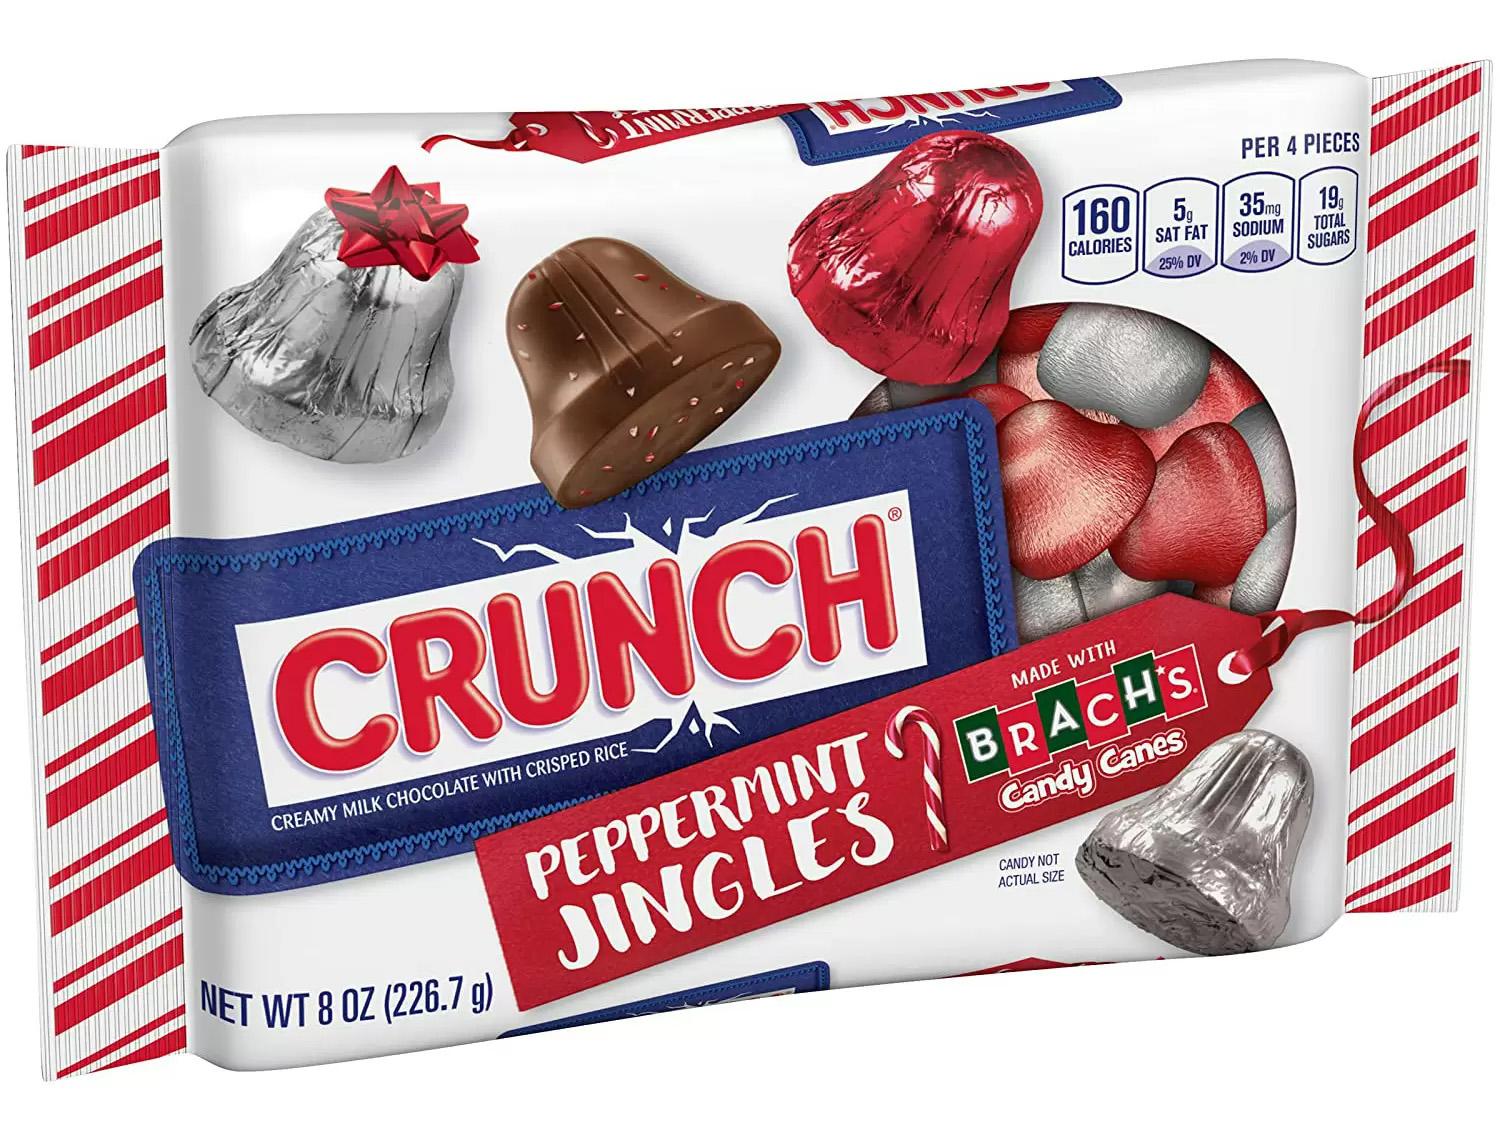 24 Pack Crunch Peppermint Jingles for $19.46